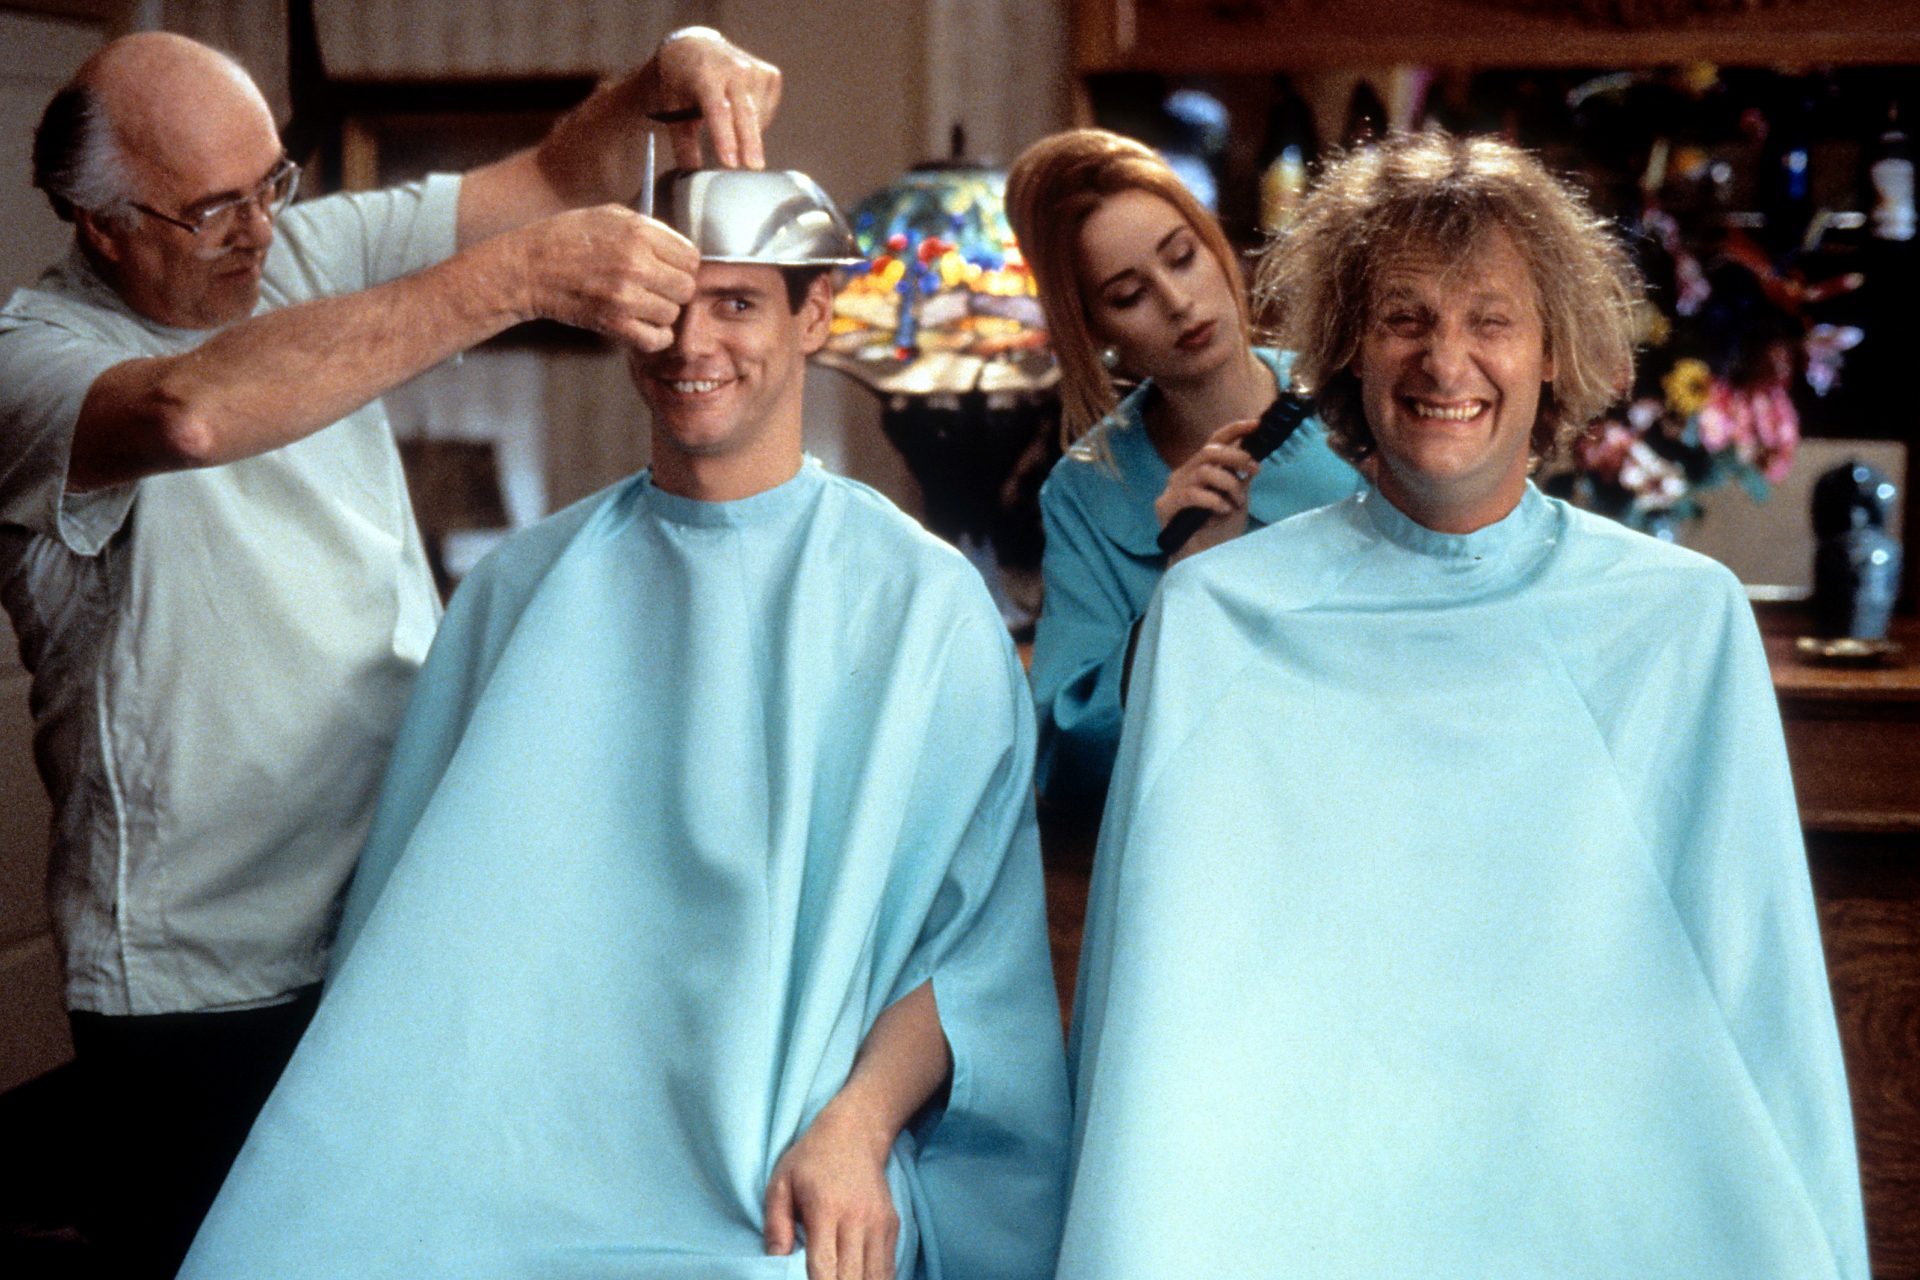 Jim Carrey made 140 times more than Jeff Daniels for 'Dumb and Dumber'